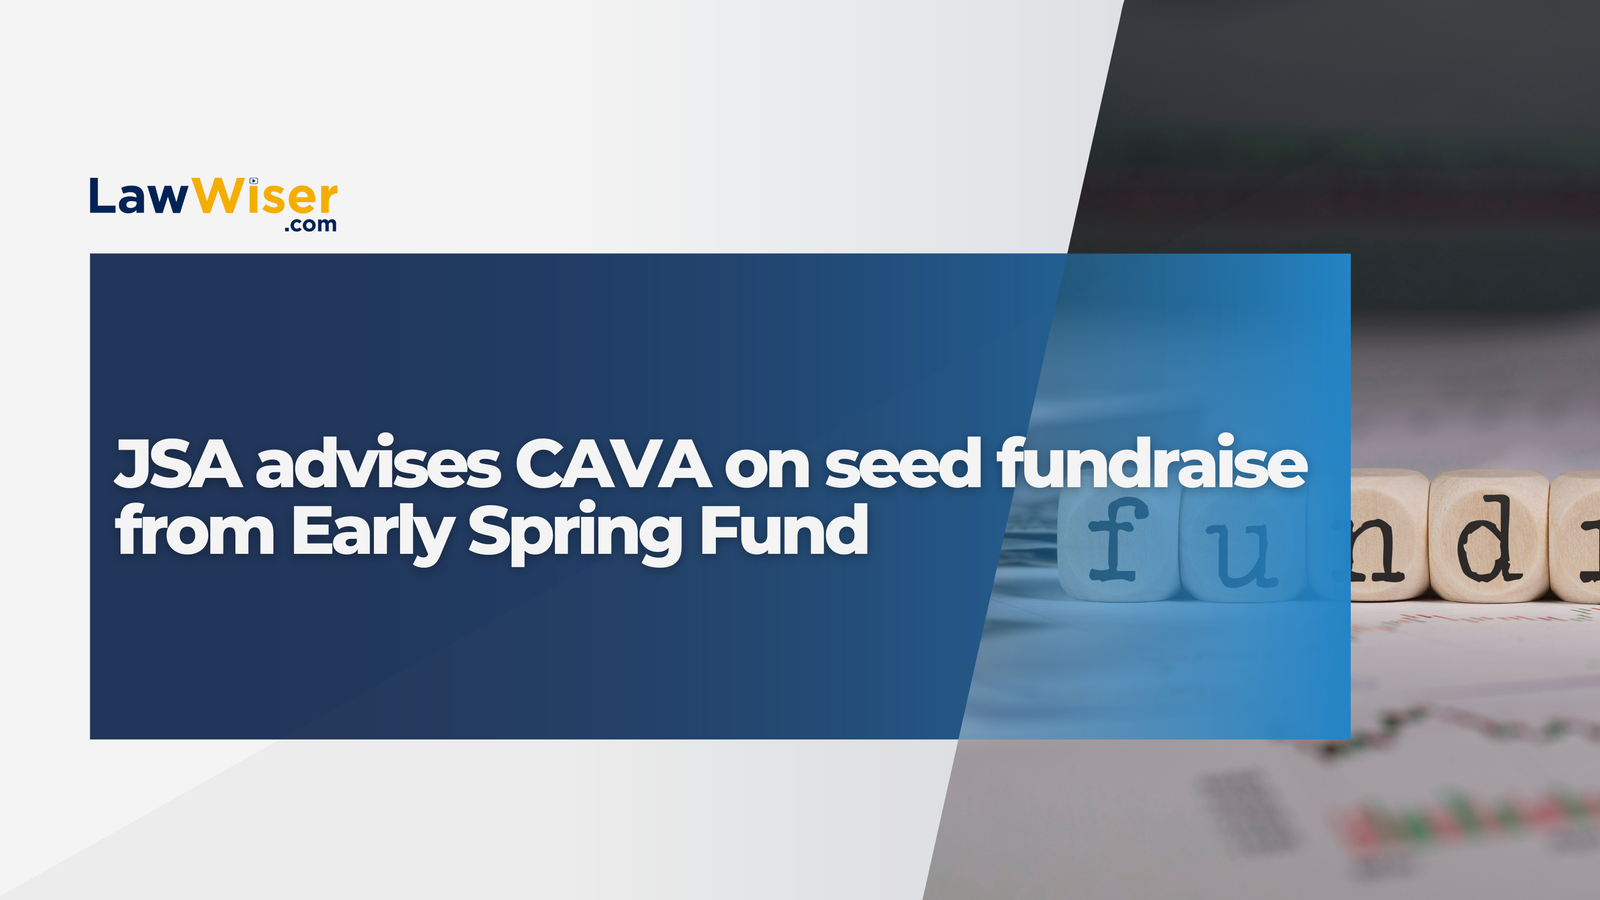 JSA advises CAVA on seed fundraise from Early Spring Fund